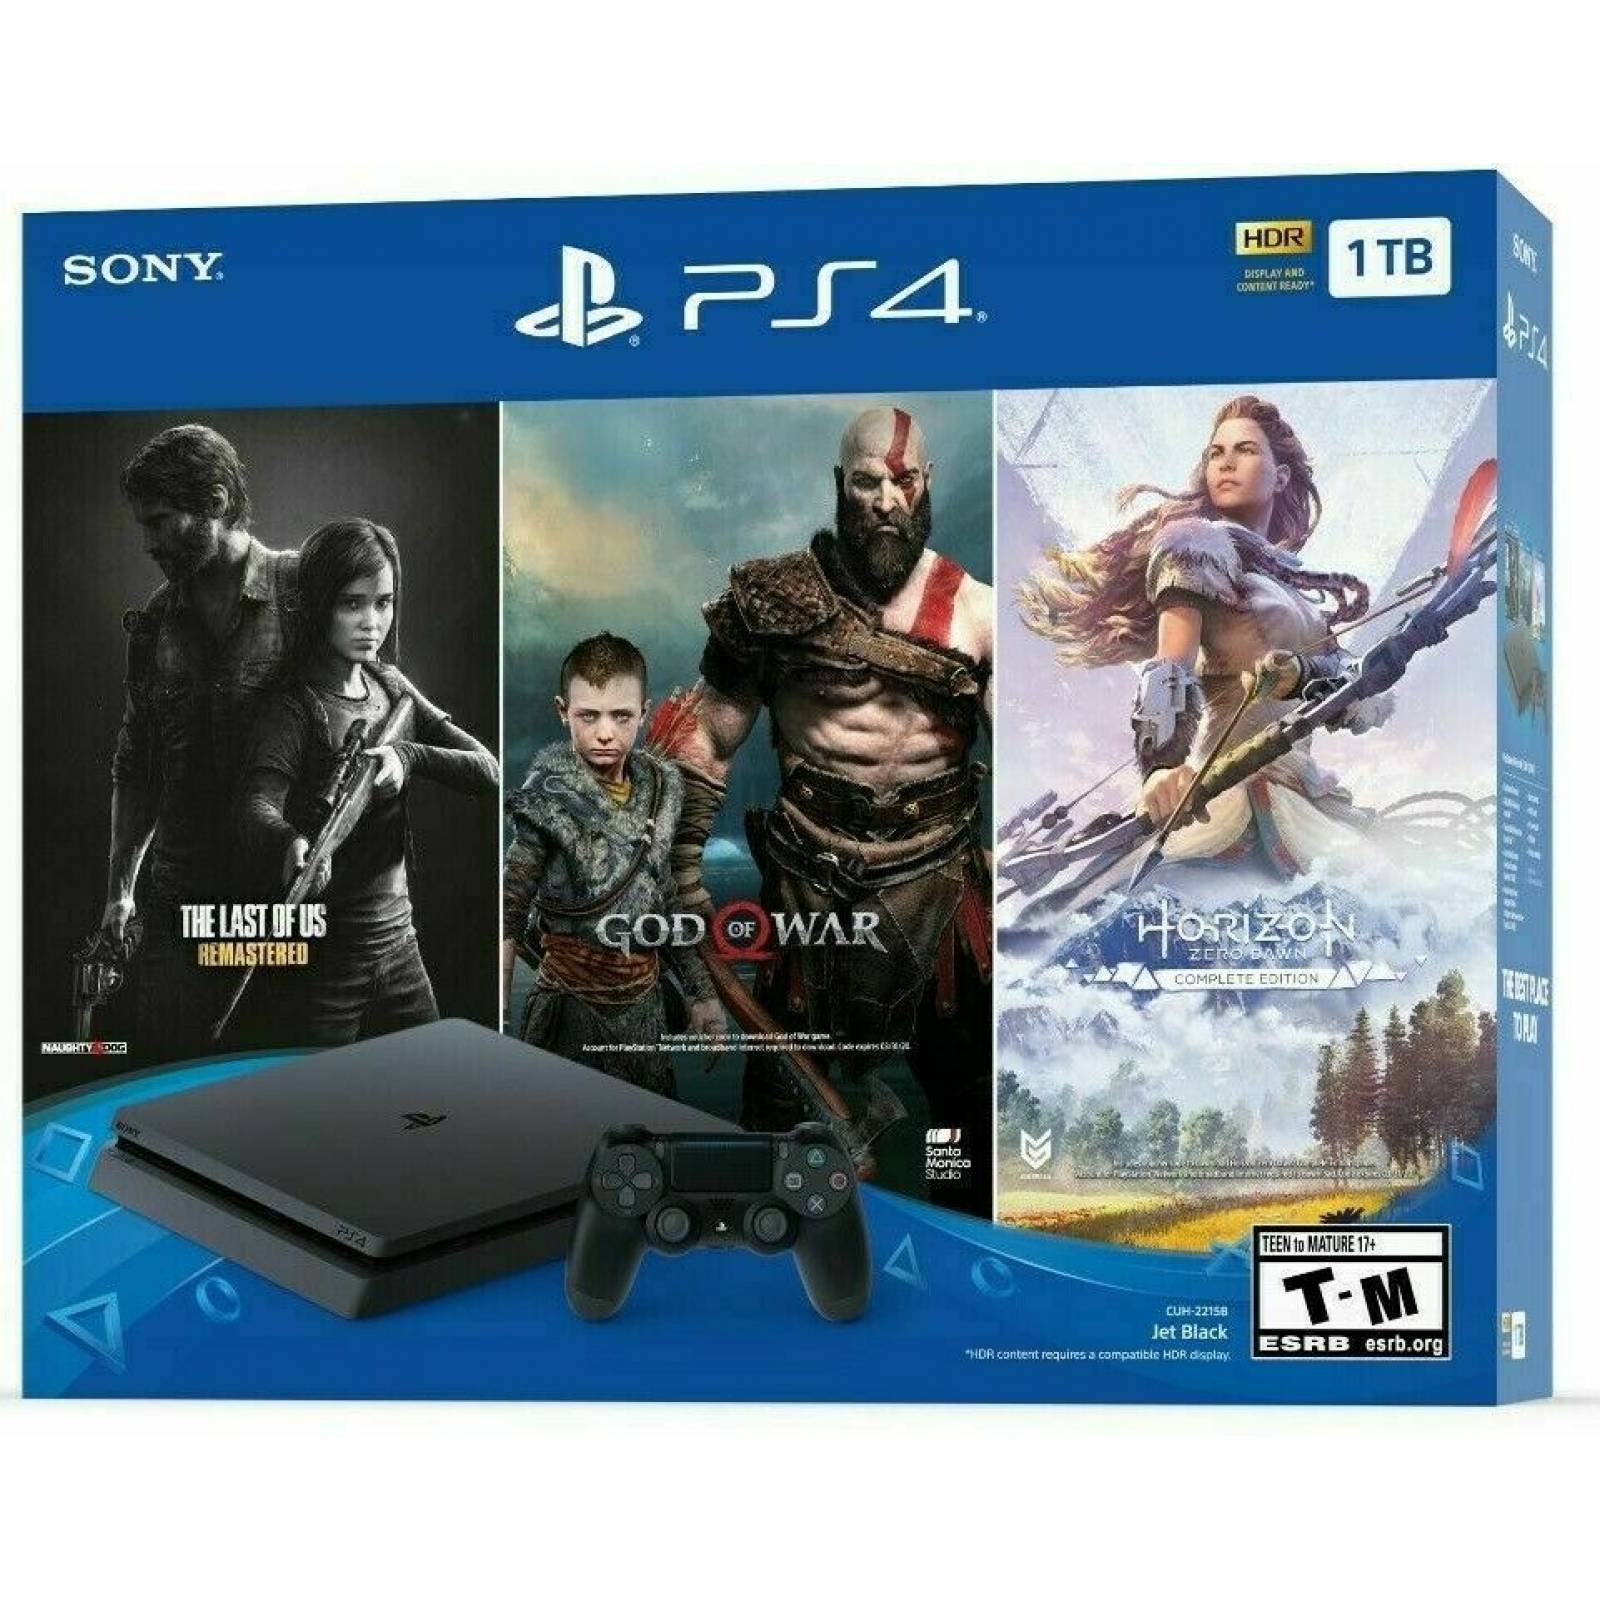 PS4 Slim 1TB Only on PlayStation God Of War, Horizon, The Last of Us Bundle